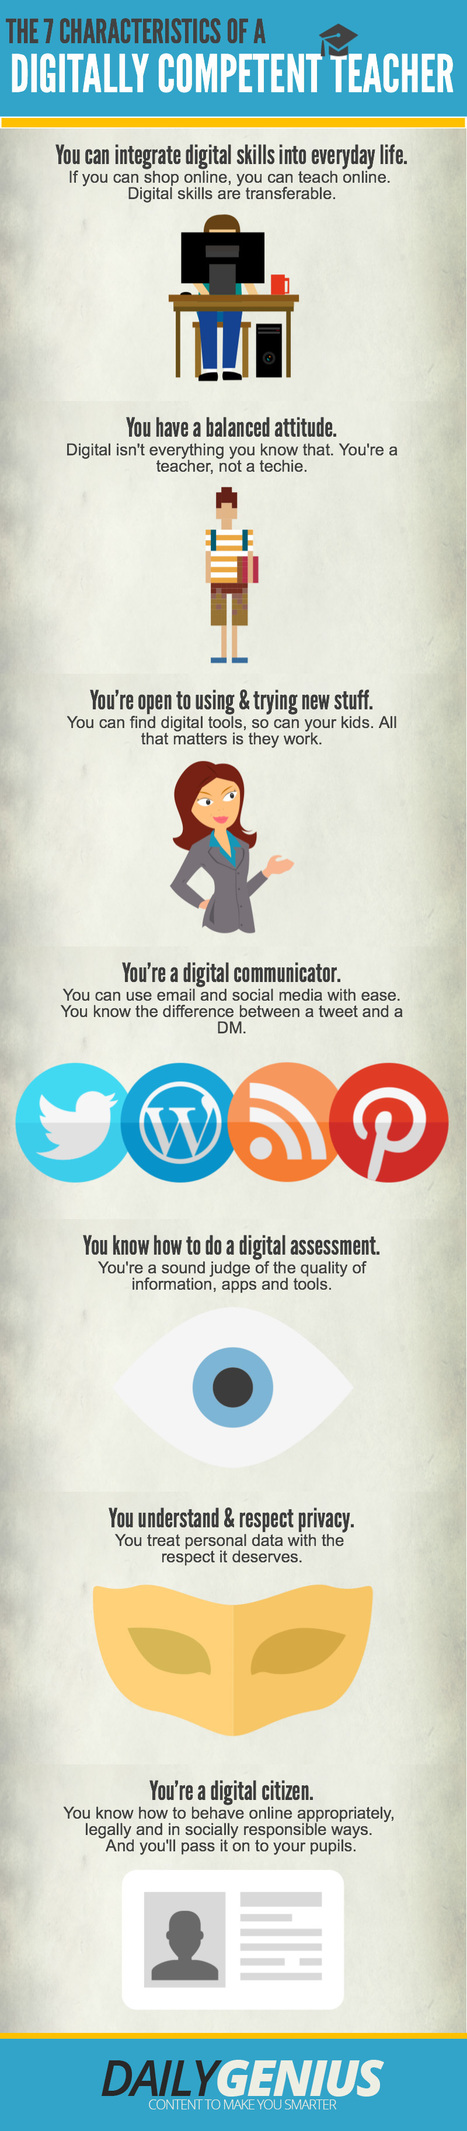 The Characteristics of a Digitally Competent Teacher (Infographic) | Education 2.0 & 3.0 | Scoop.it